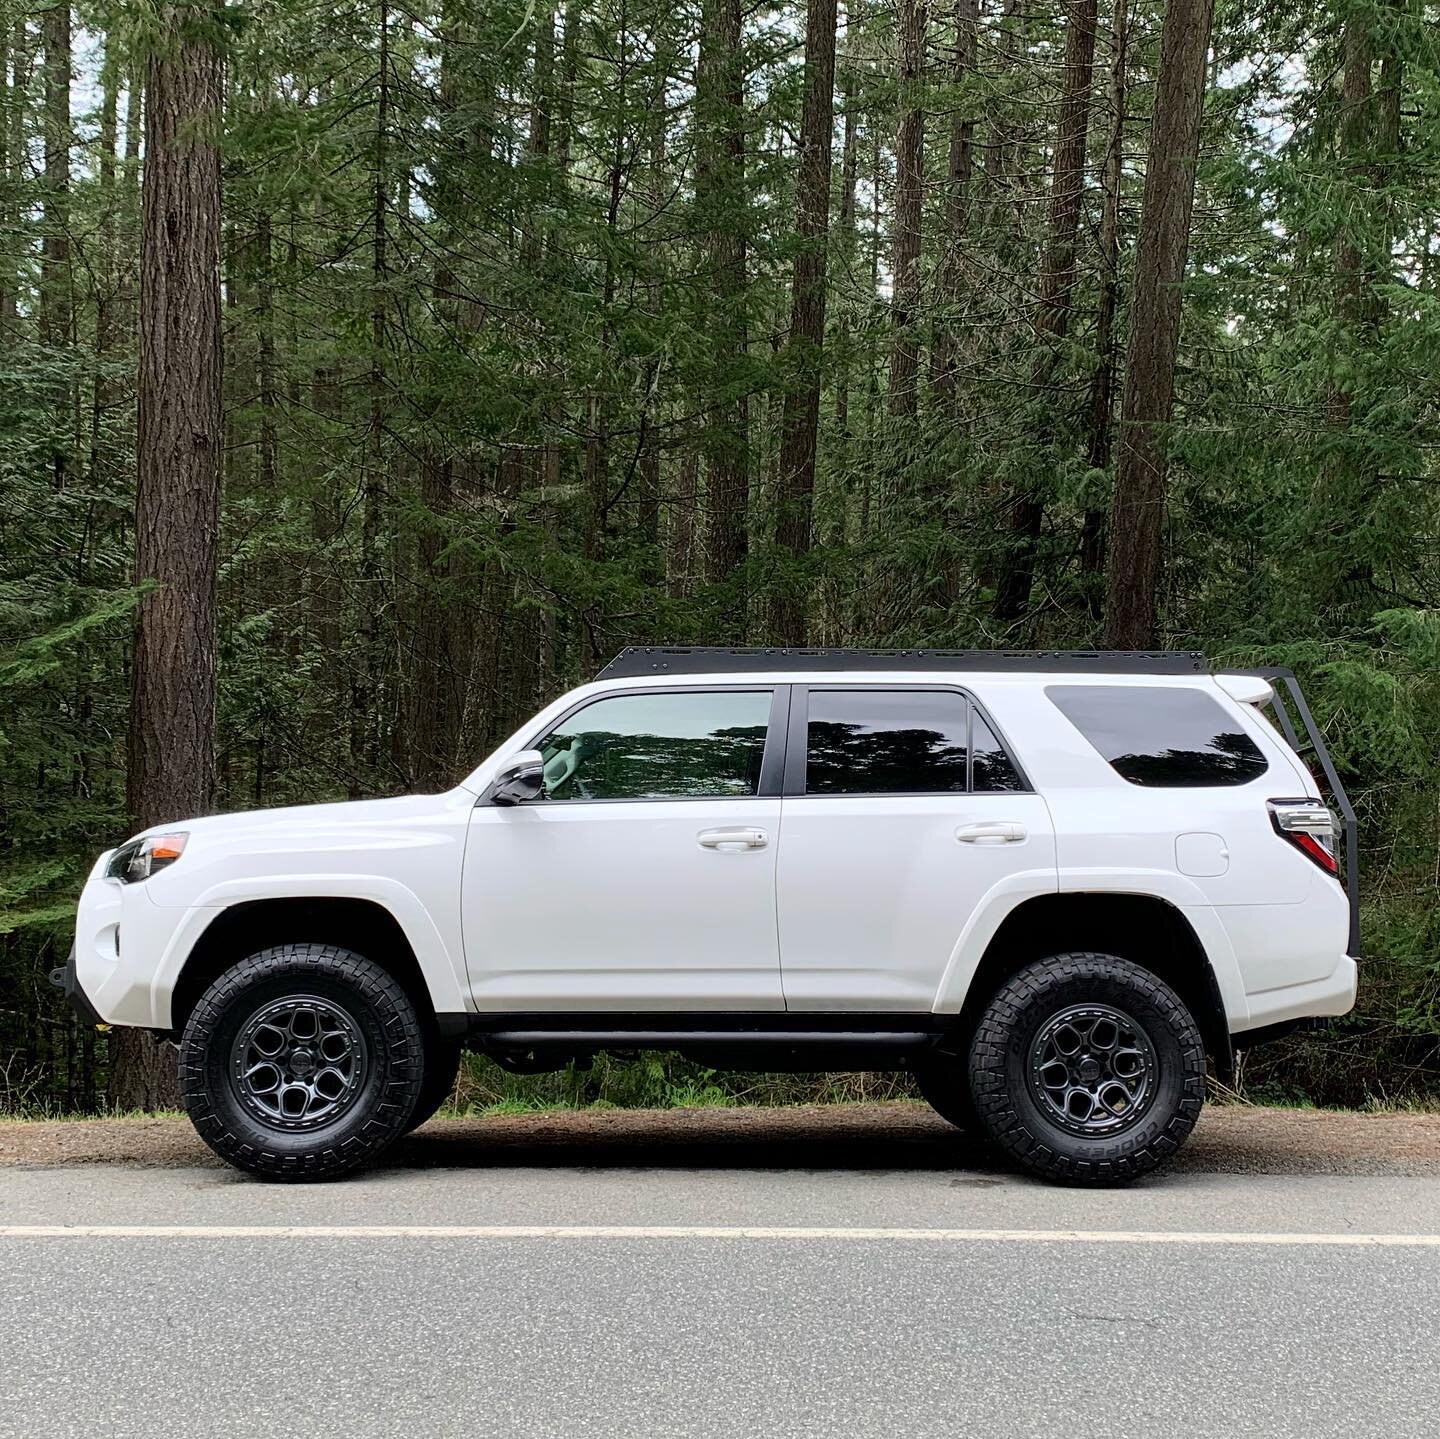 We were out in search of places to self isolate on the weekend in our GreenLane test rig. We&rsquo;re working on some video media of the build and will be using the 4runner to further develop our product line! More details to come, but here it is in 